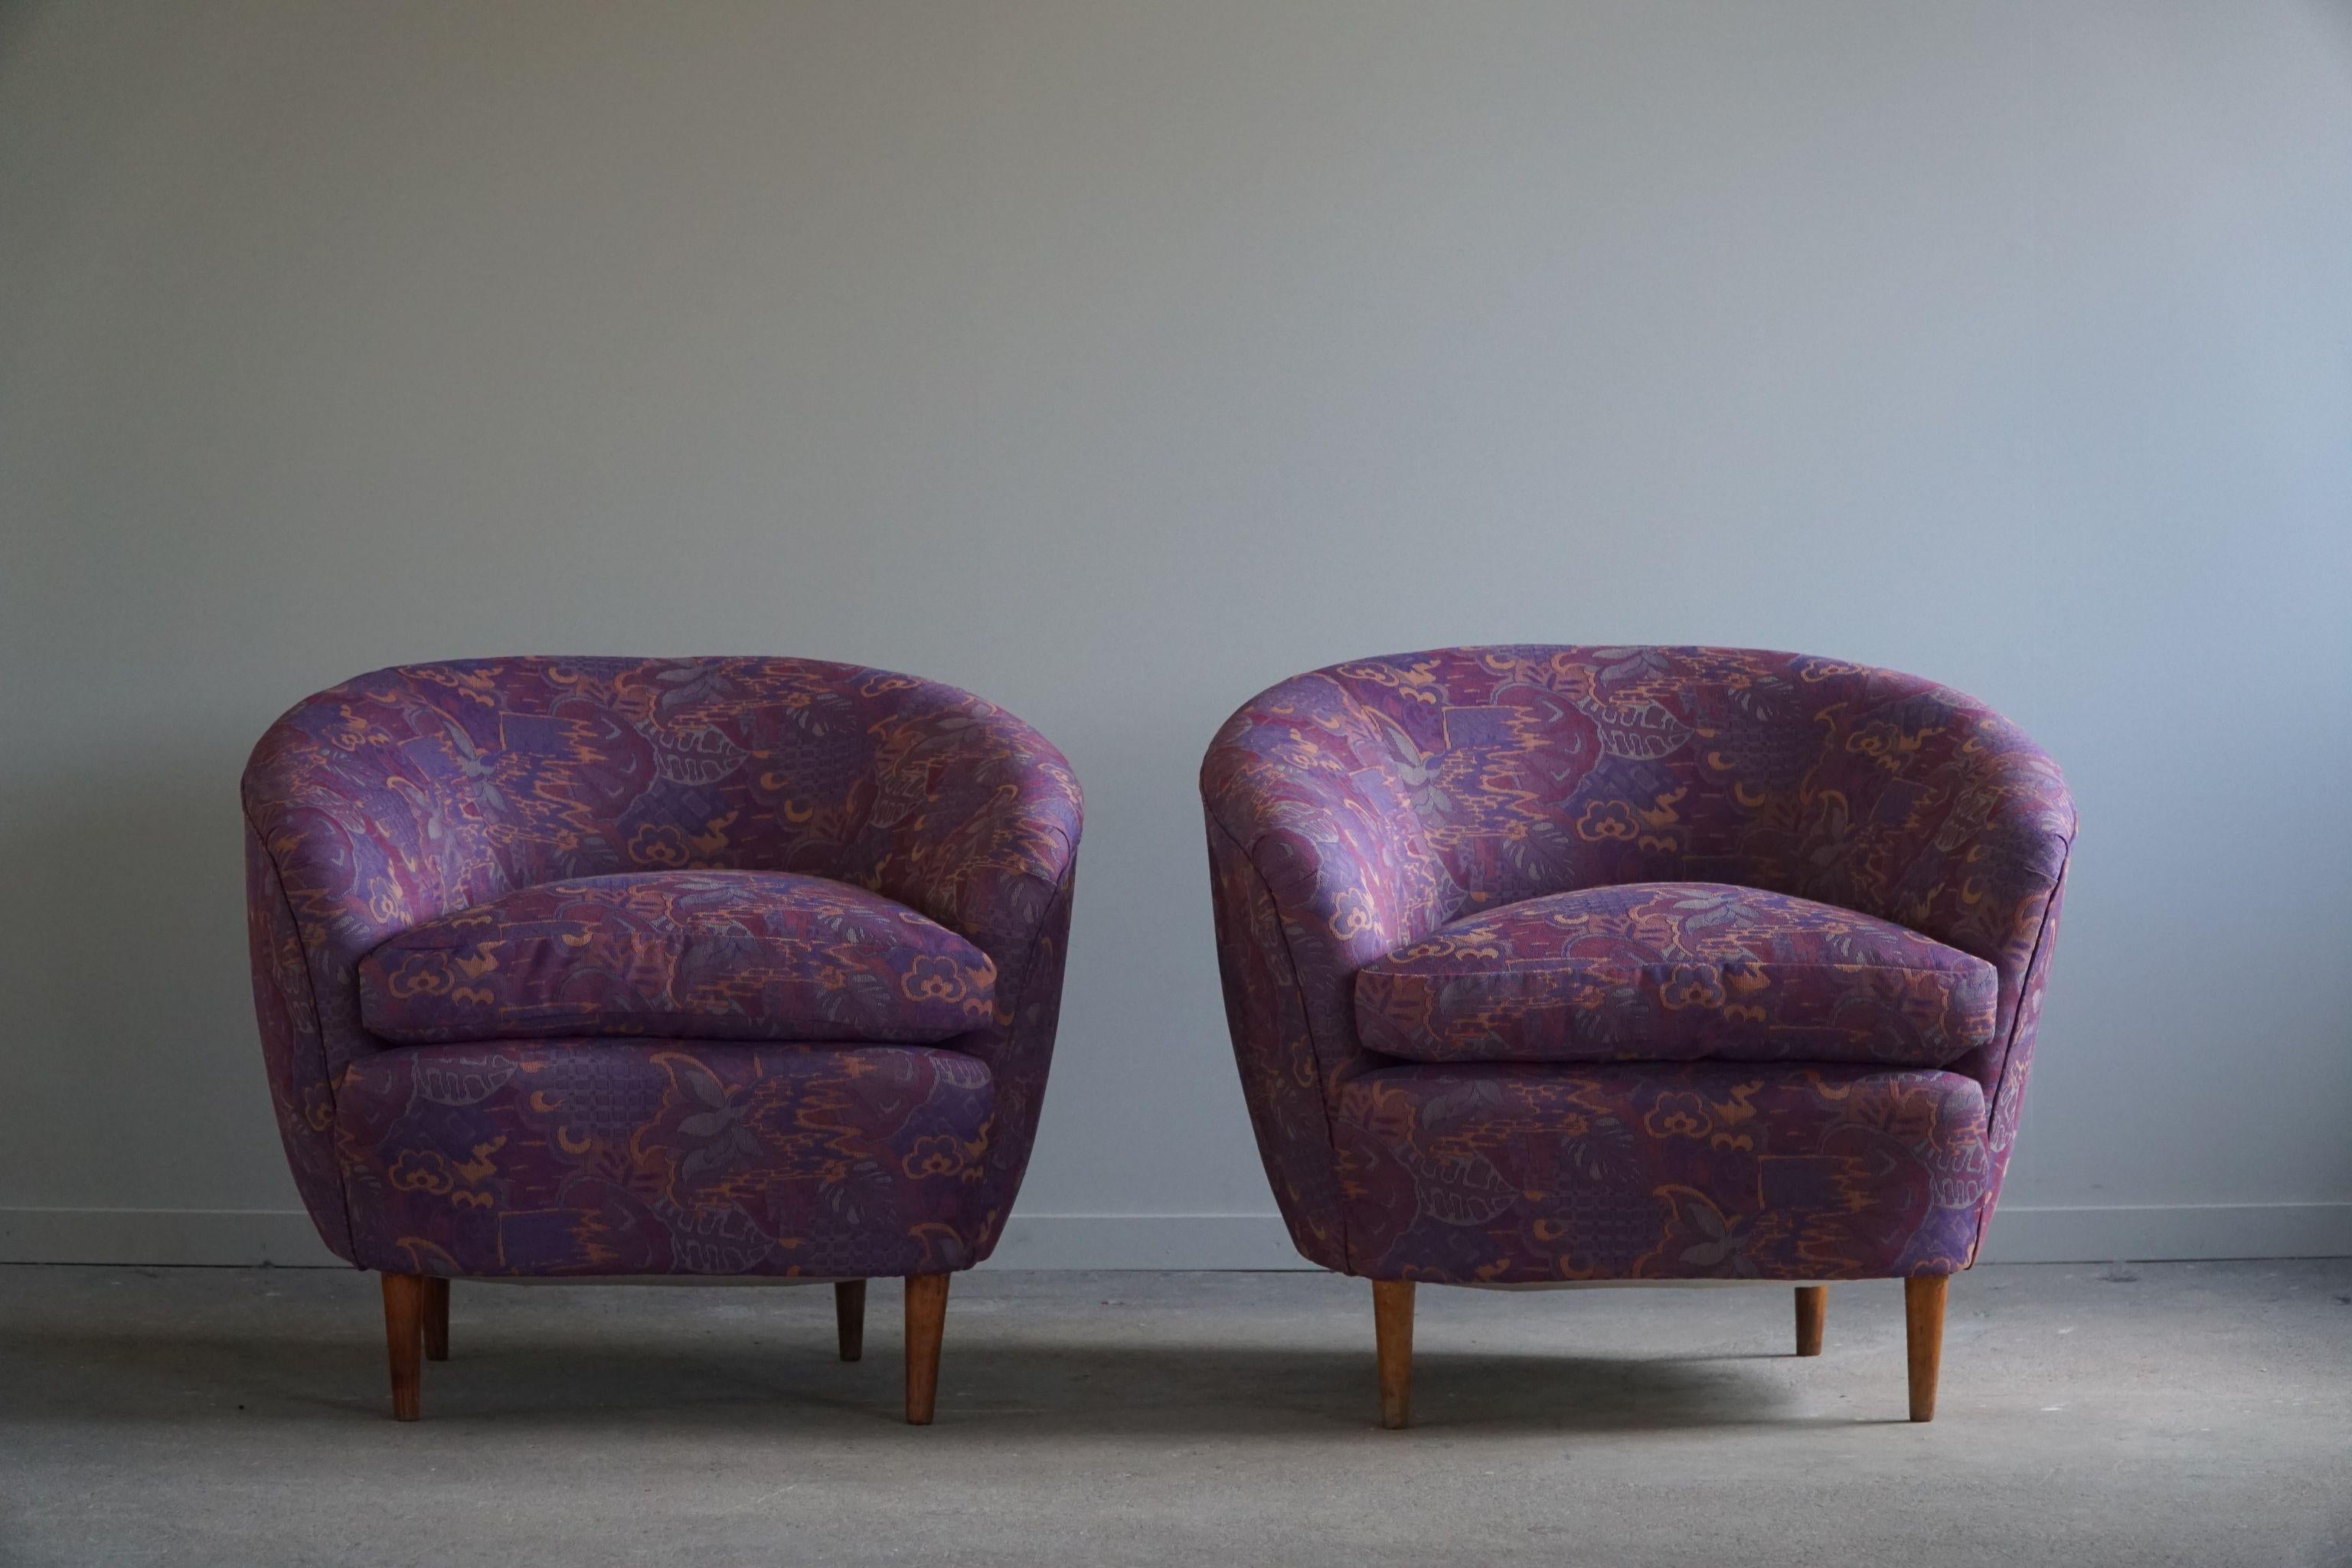 A magnificent pair of curved club chairs, reupholstered in a luxurious vintage fabric stored from the 1980s. This nicely patterned fabric really complements the soft curves. Made in the style of the world known Italian Designer Gio Ponti in the